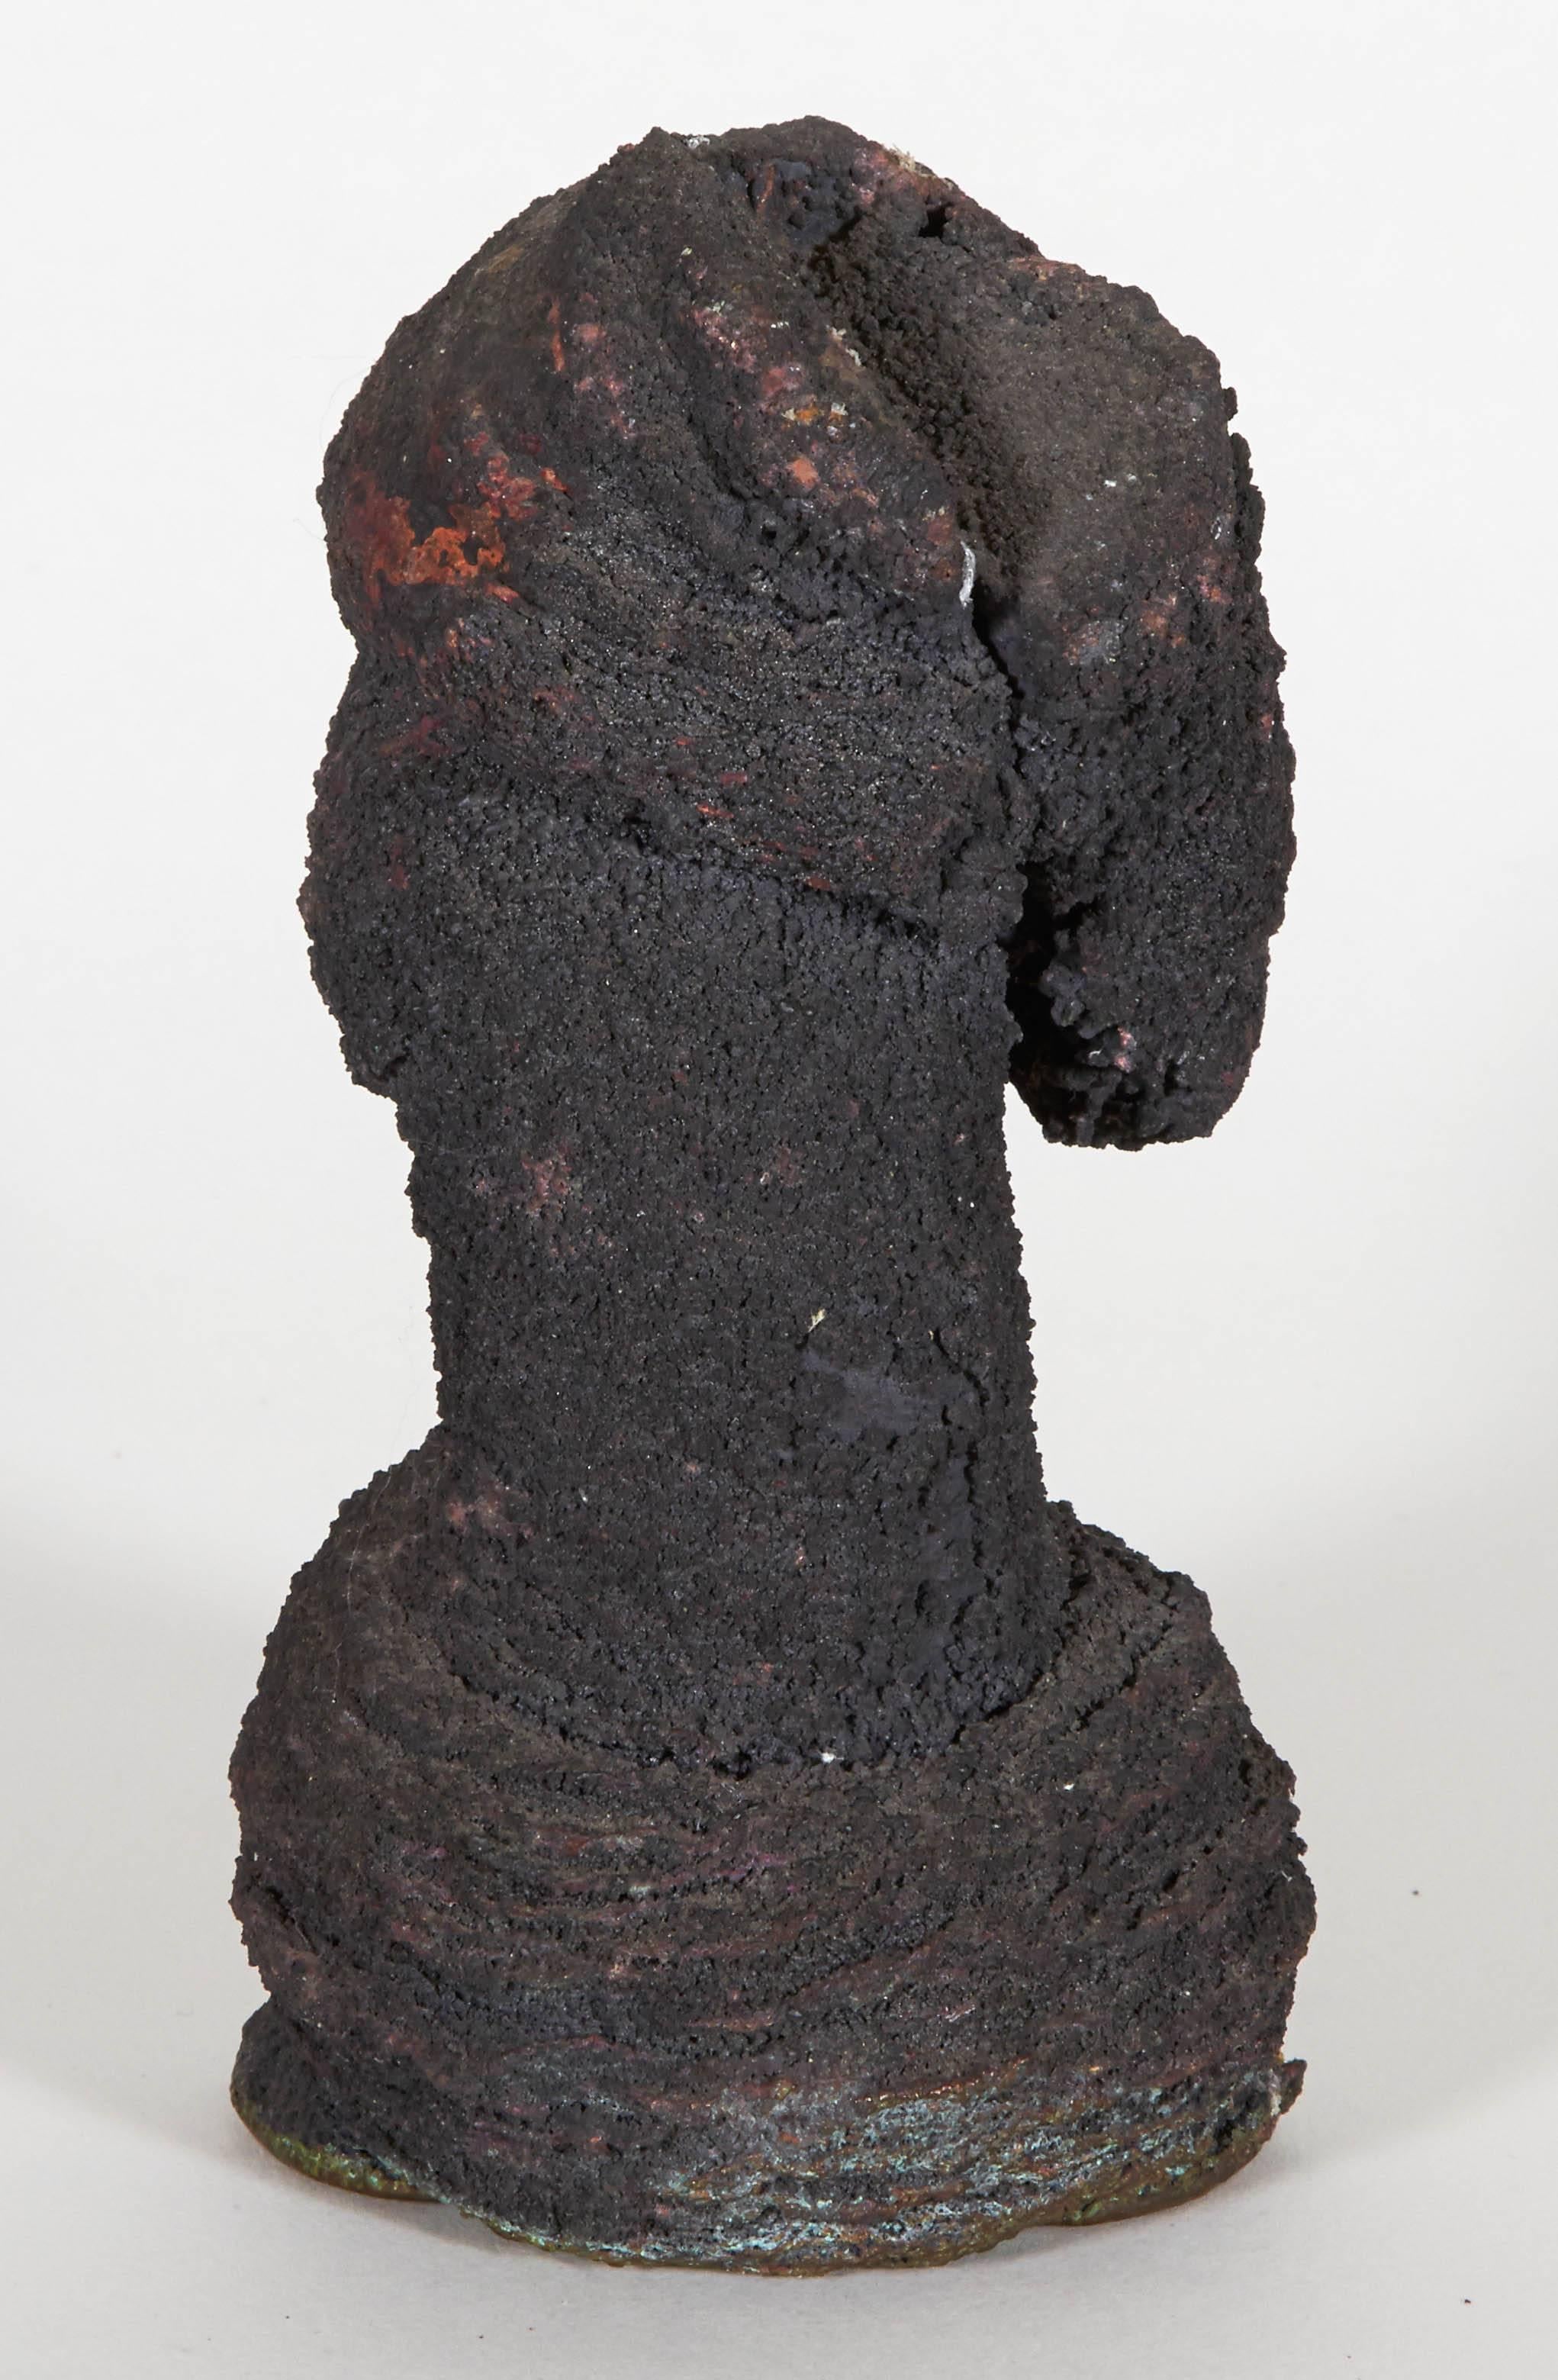 A unique example of Bertoia's pressure melt technique, wherein metals are heated and subjected to hammer blows to achieve the desired form. This piece is in bronze with a heavy coat of thick carbon material adhered to the surface.